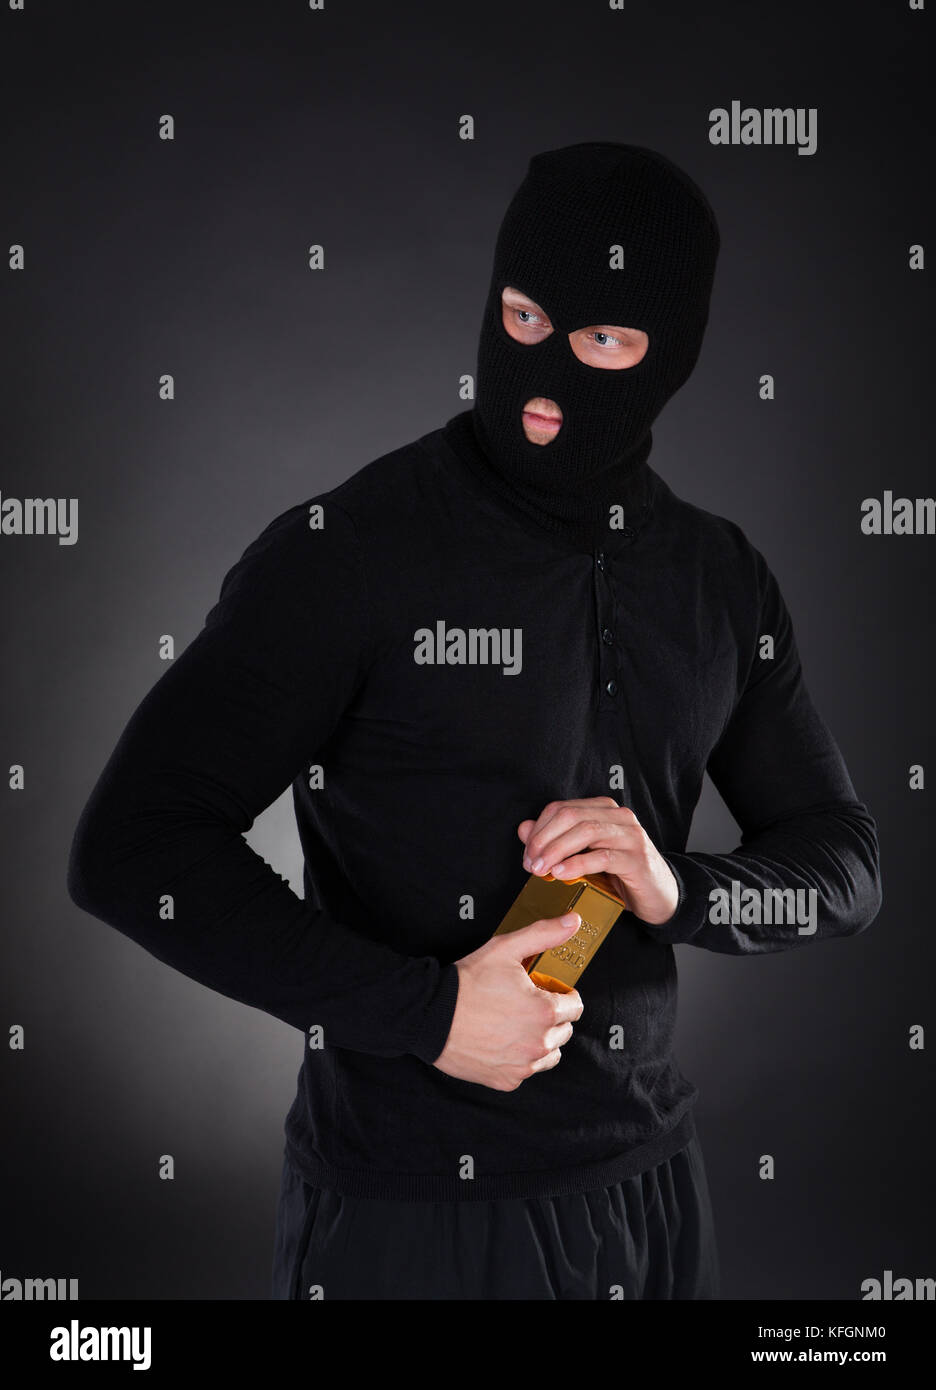 Robber disguised in a black balaclava holding a gold bullion bar as he makes his getaway from a heist with the loot through the darkness Stock Photo